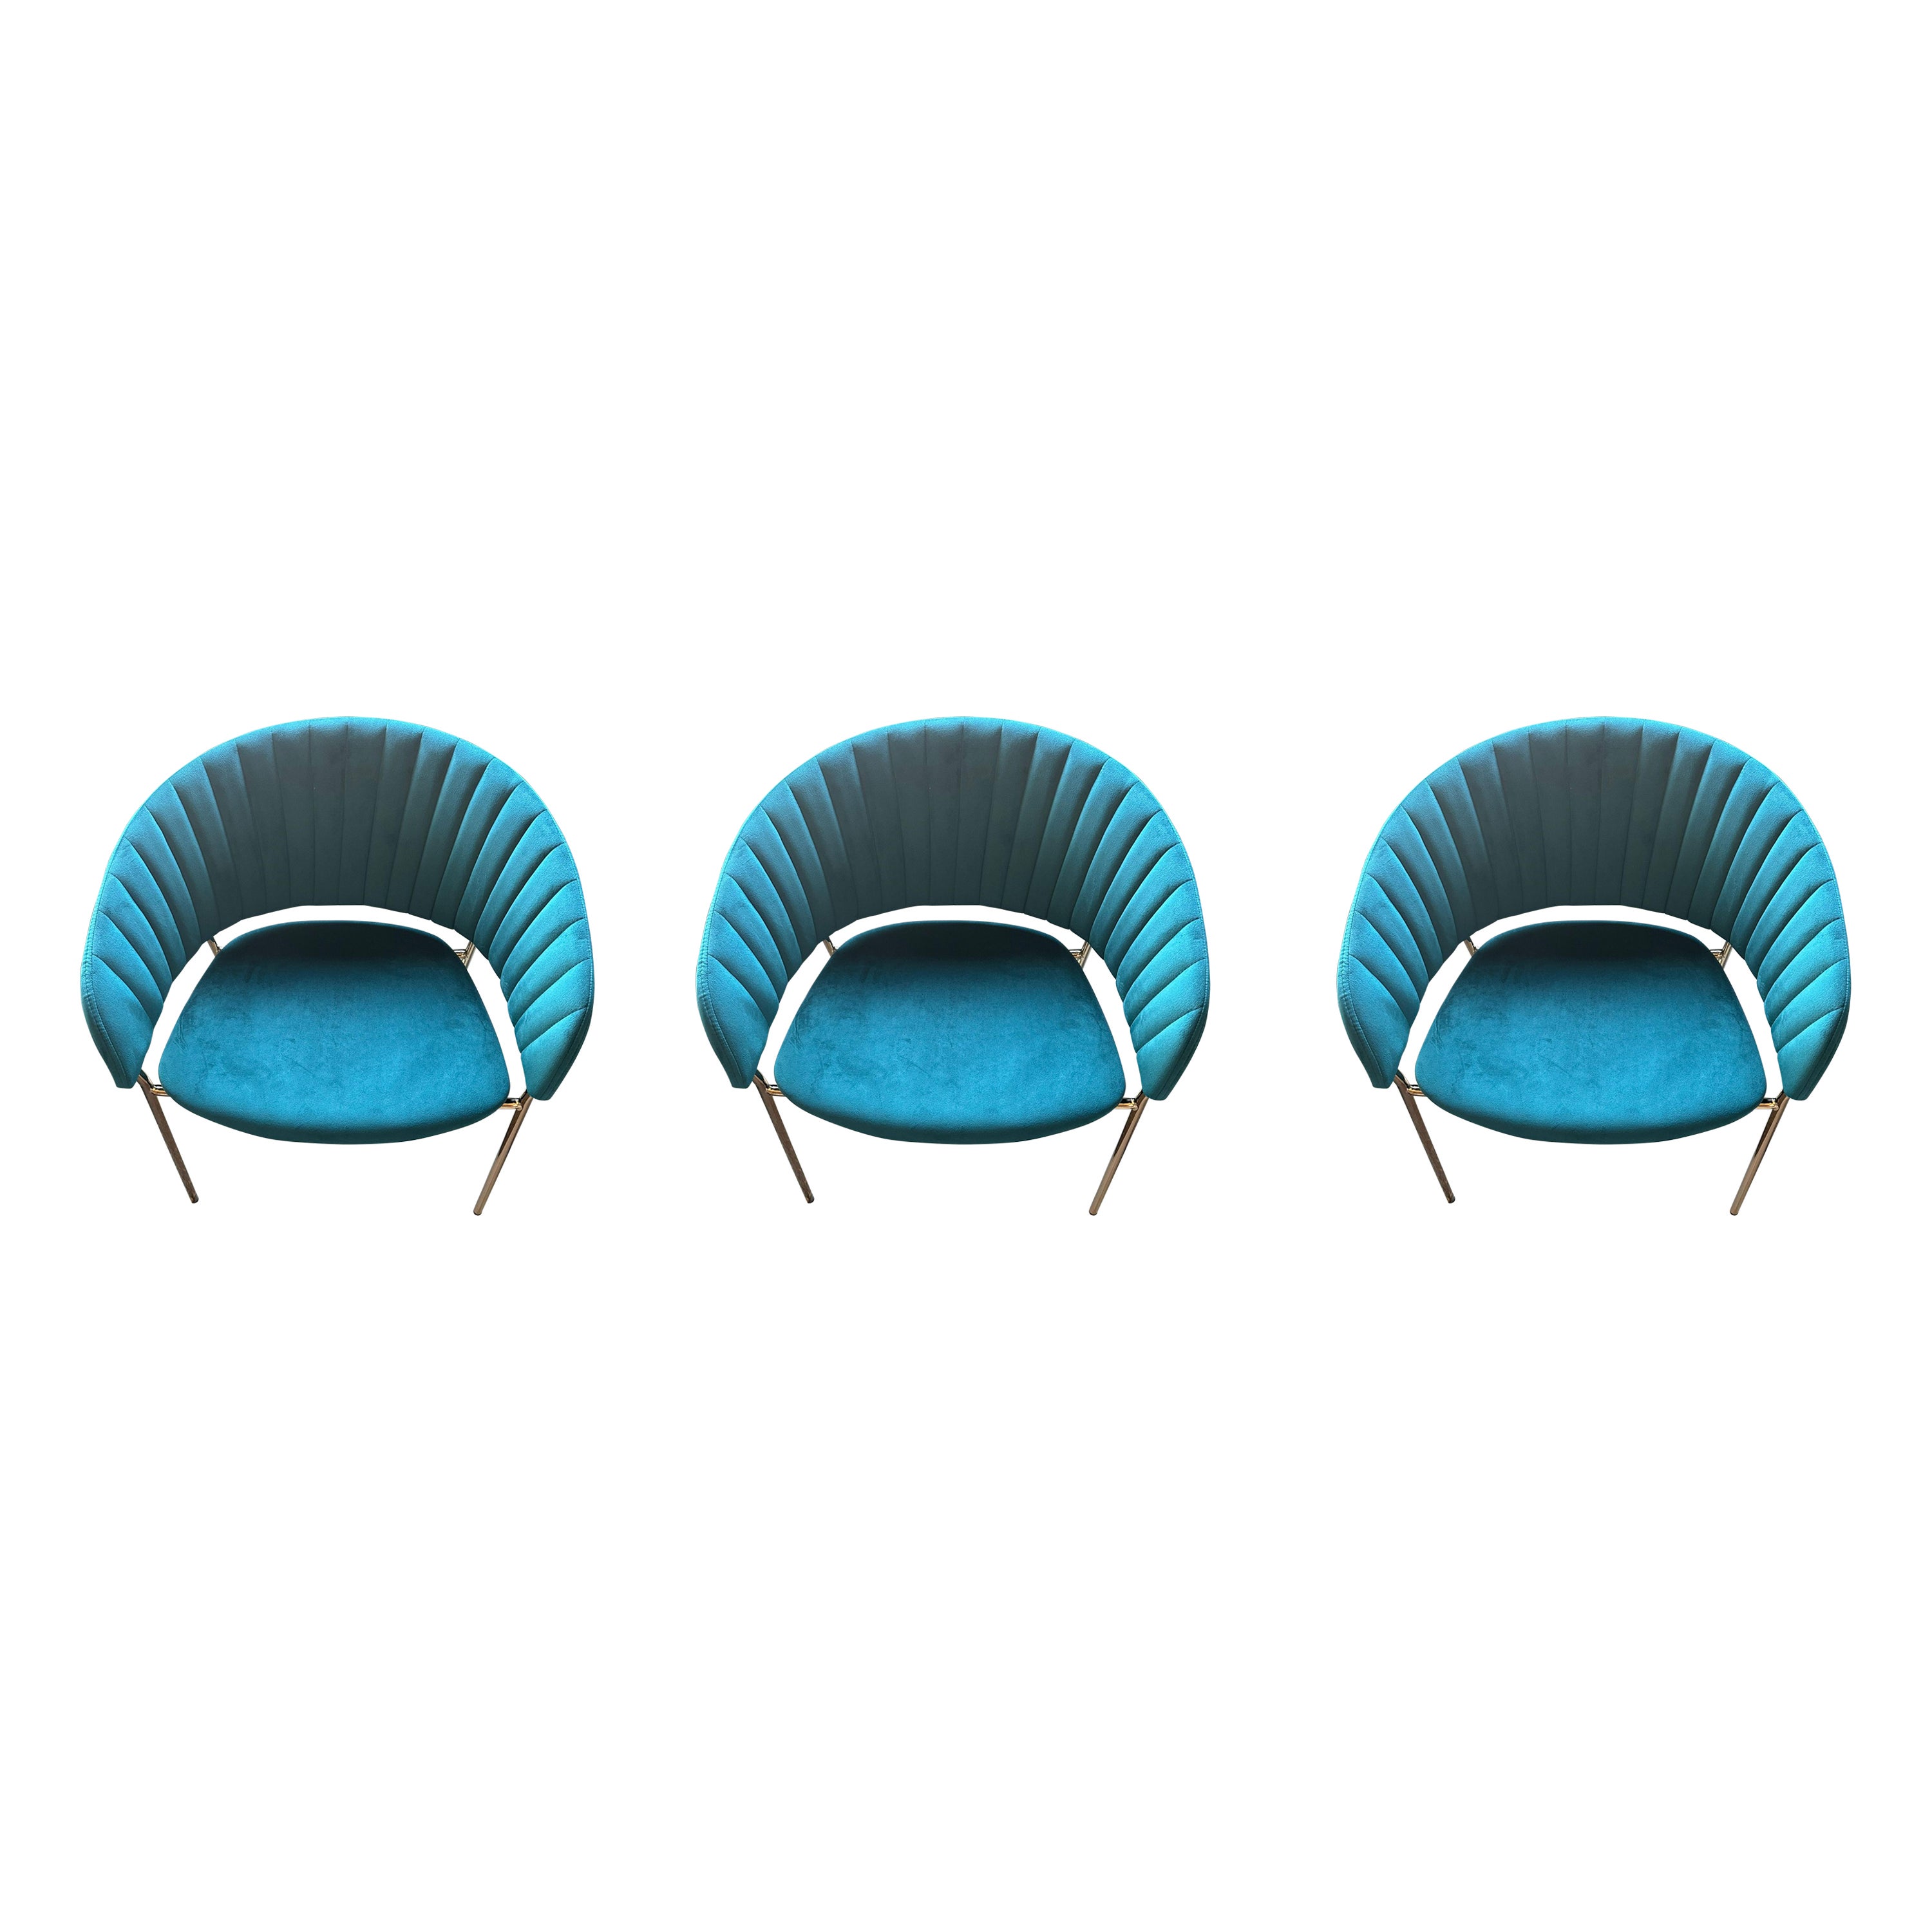 Tree New Spanish Chairs in Blue " Pavo Real "